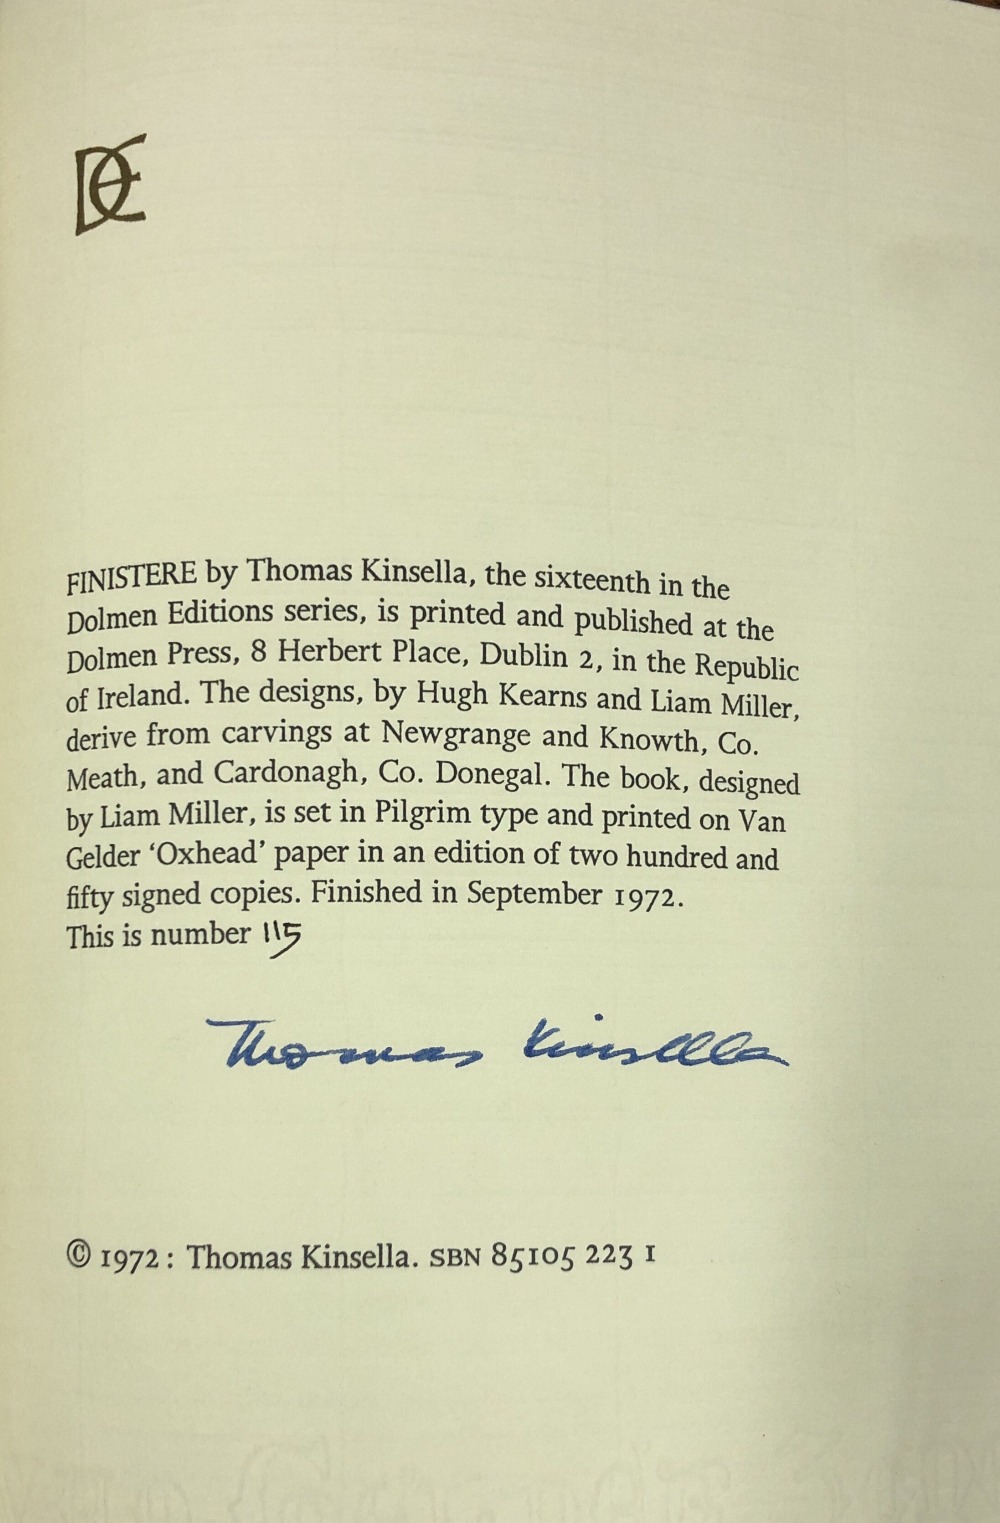 Dolmen Press: Kinsella (Thomas) Finistere, lg. 4to D. 1972. No. 115, Limited Edition of 250 Copies.